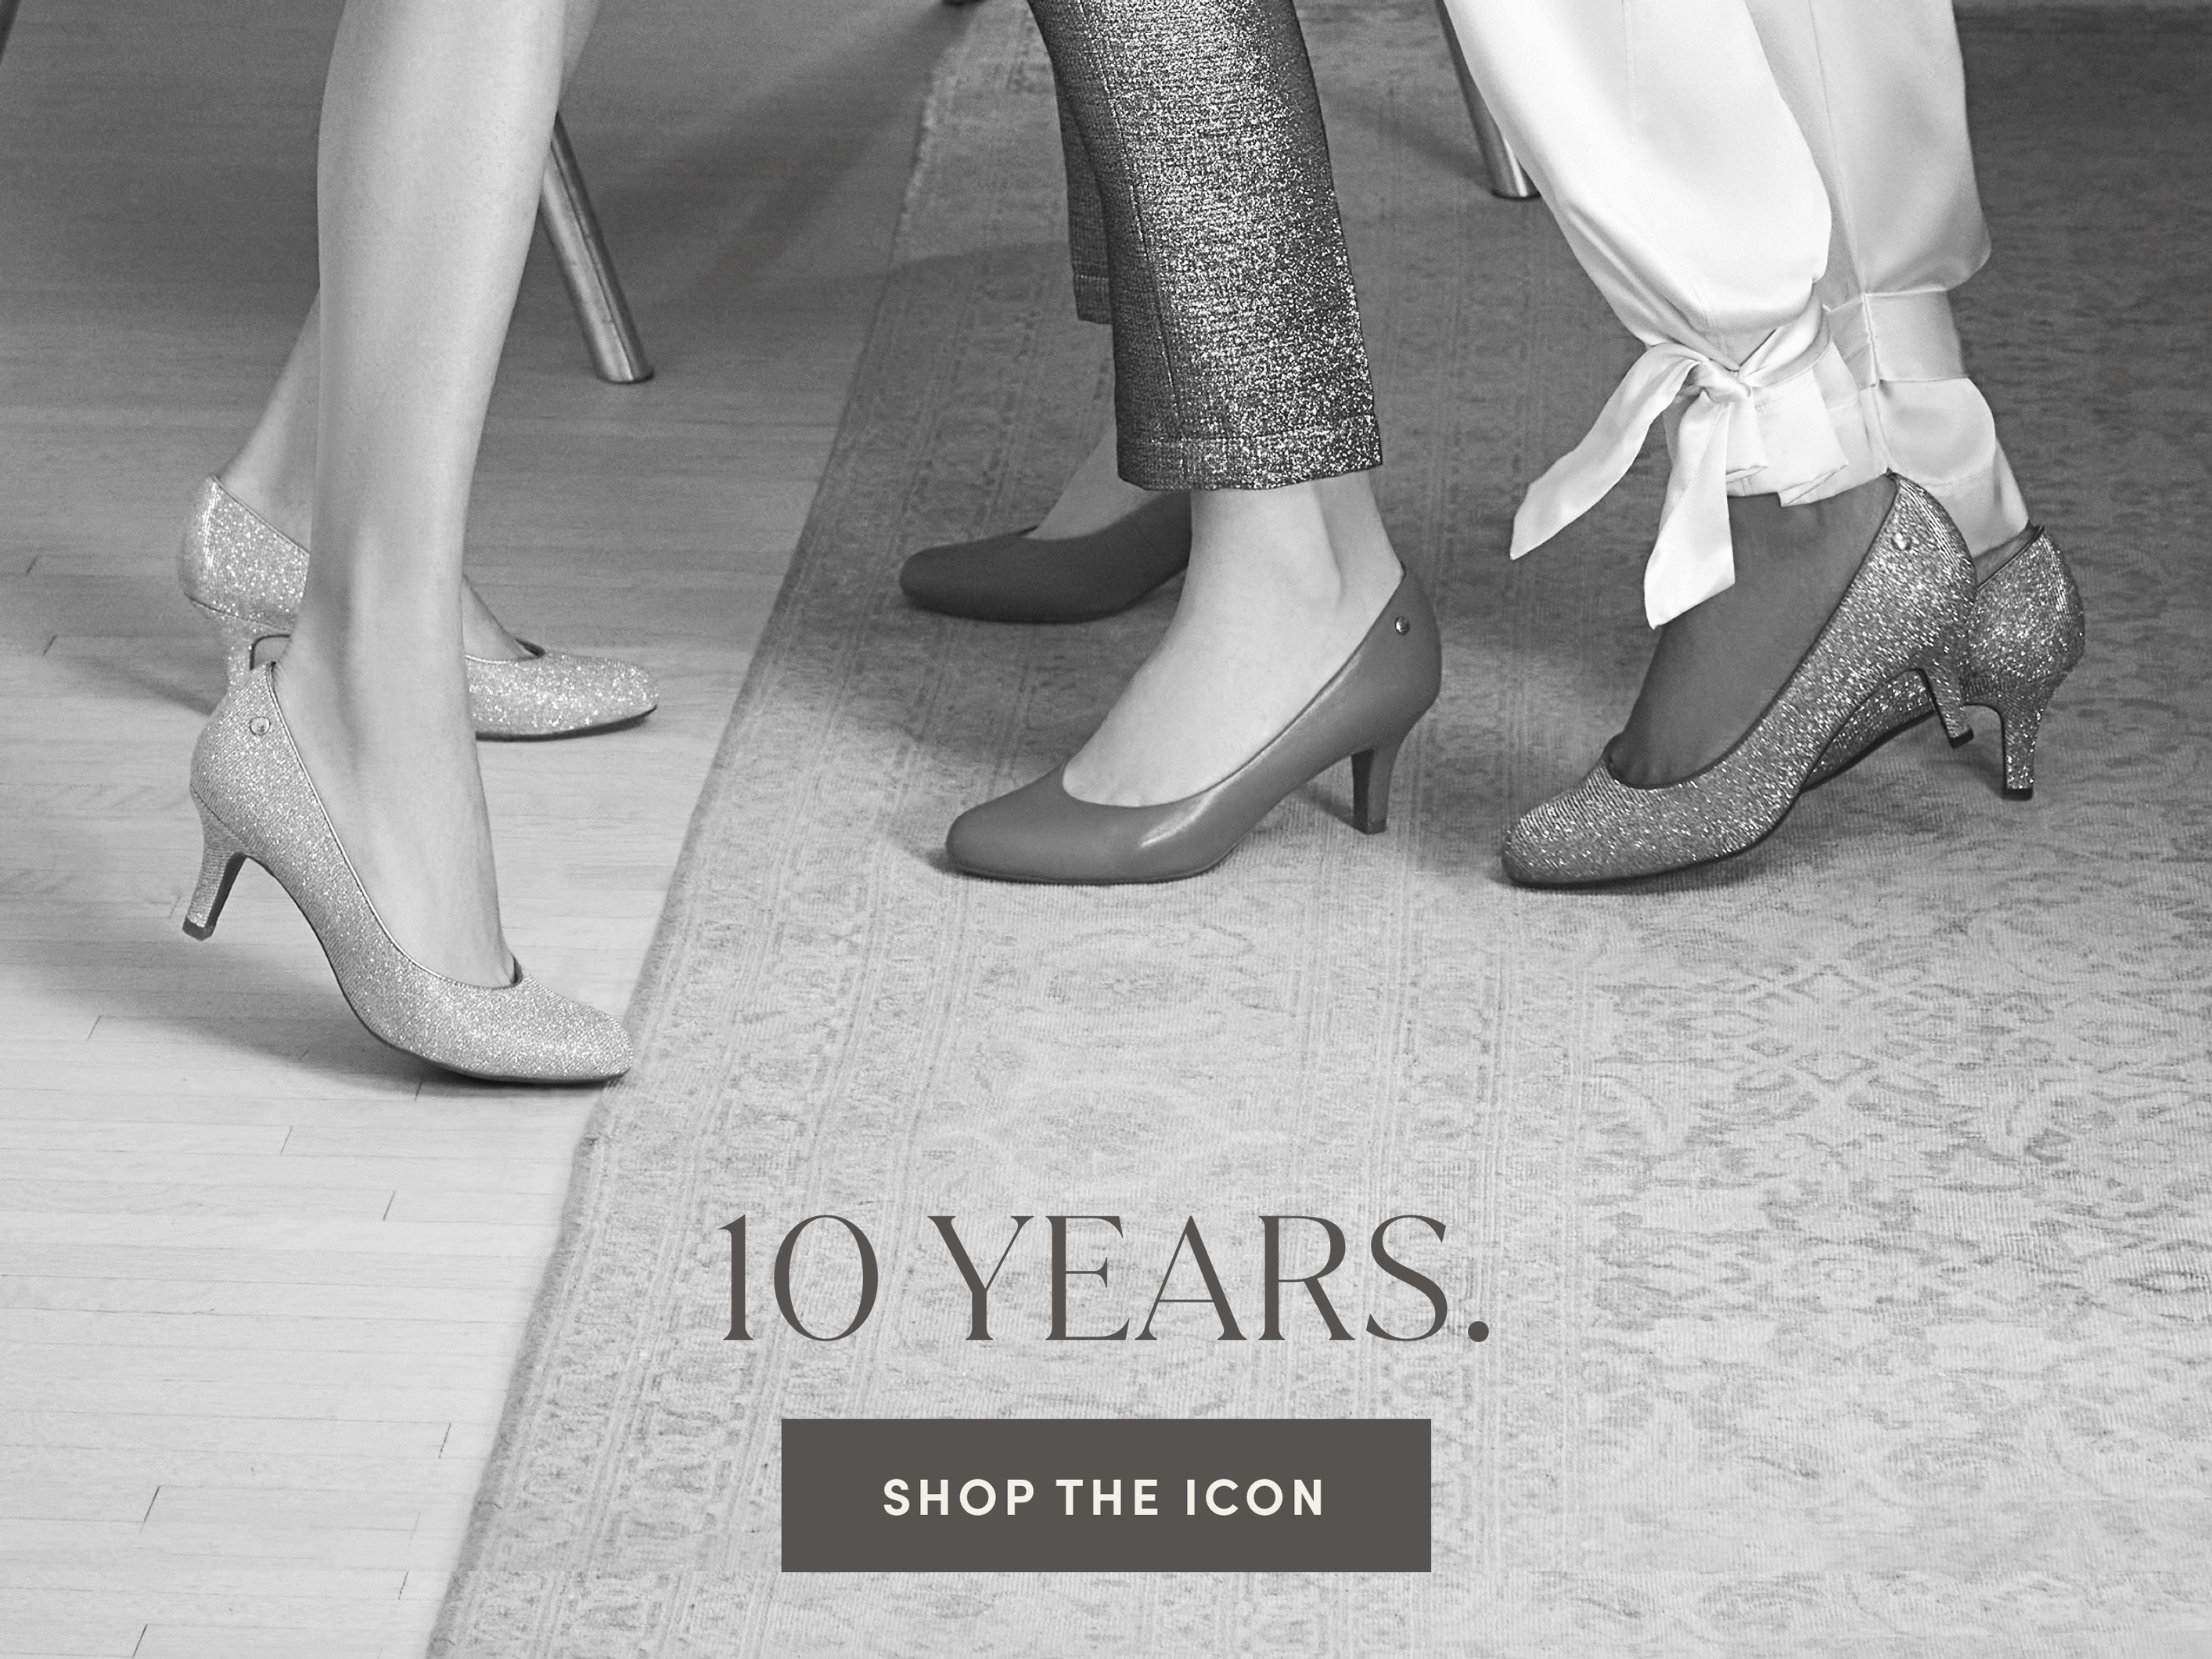 10 Years Shop the Icon